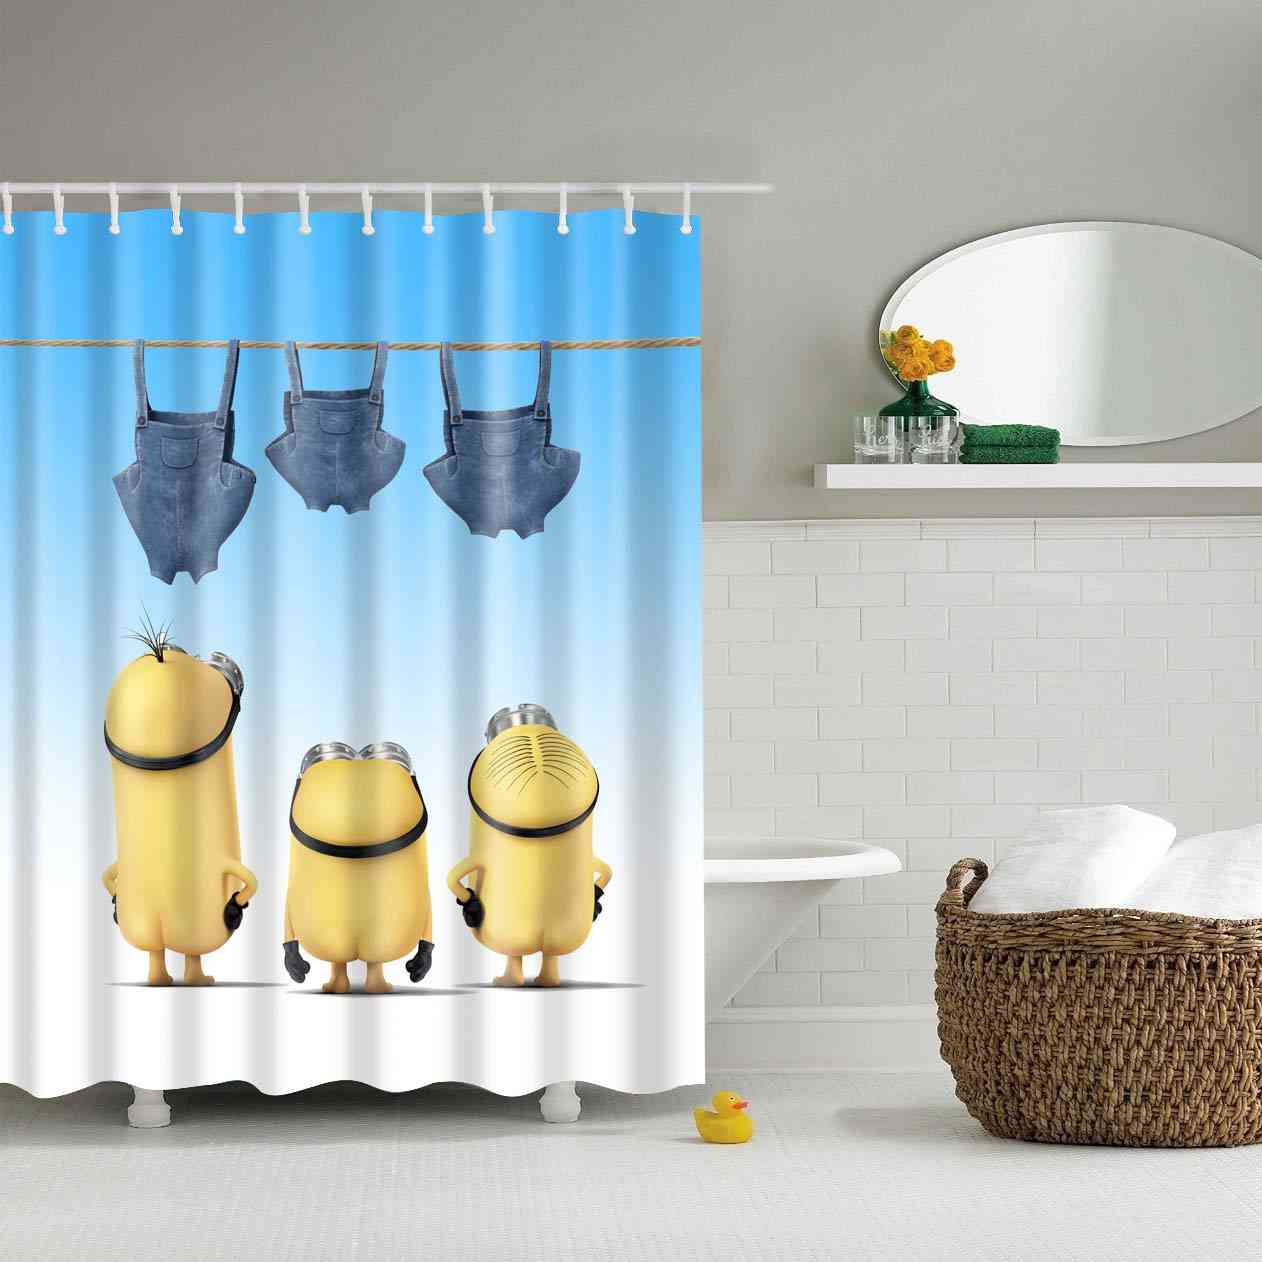 Waterproof, Polyester Fabric-3d Printed Shower Curtains